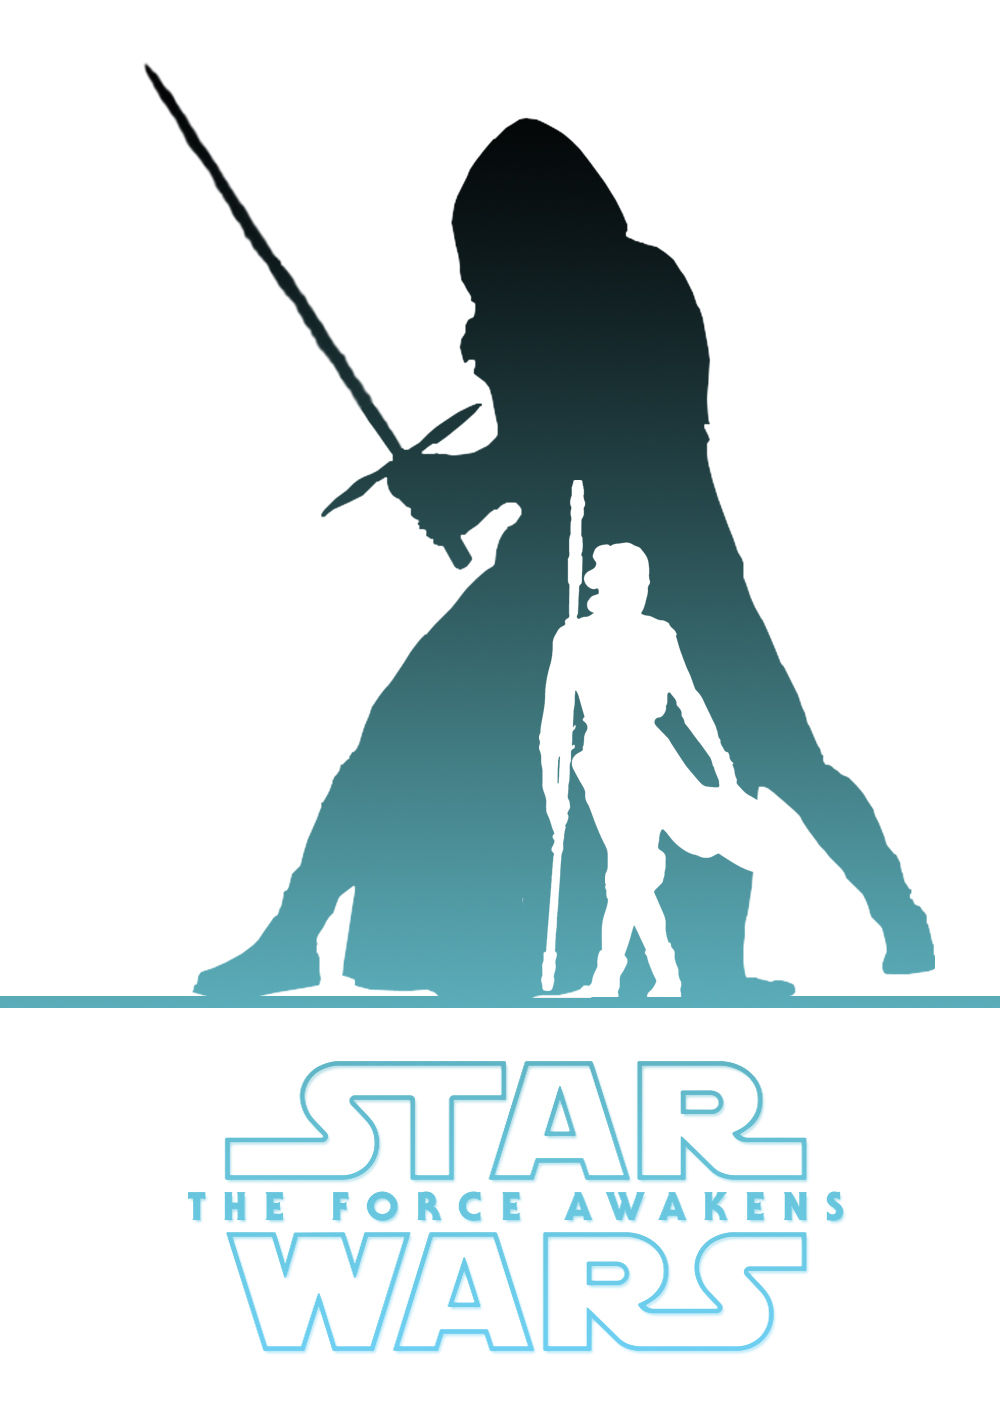 Star Wars Ep. VII: The Force Awakens for ios download free